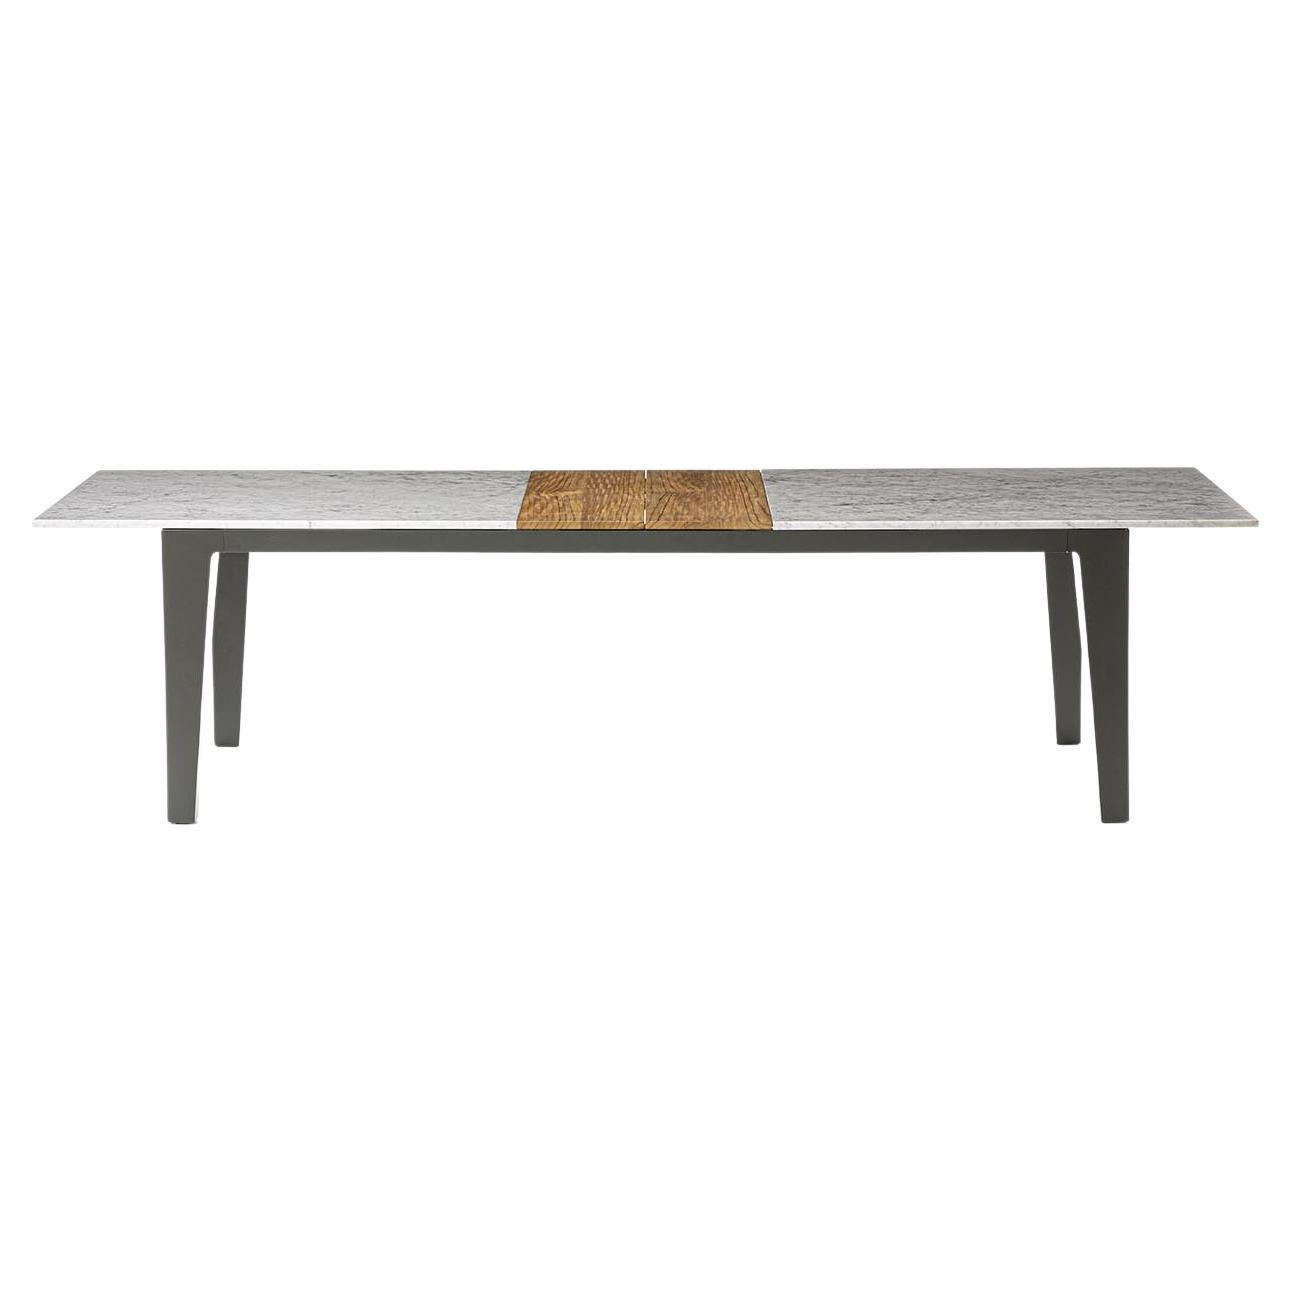 Gervasoni Small Inout Table in Marble & Extention Teak Top with Grey Aluminium